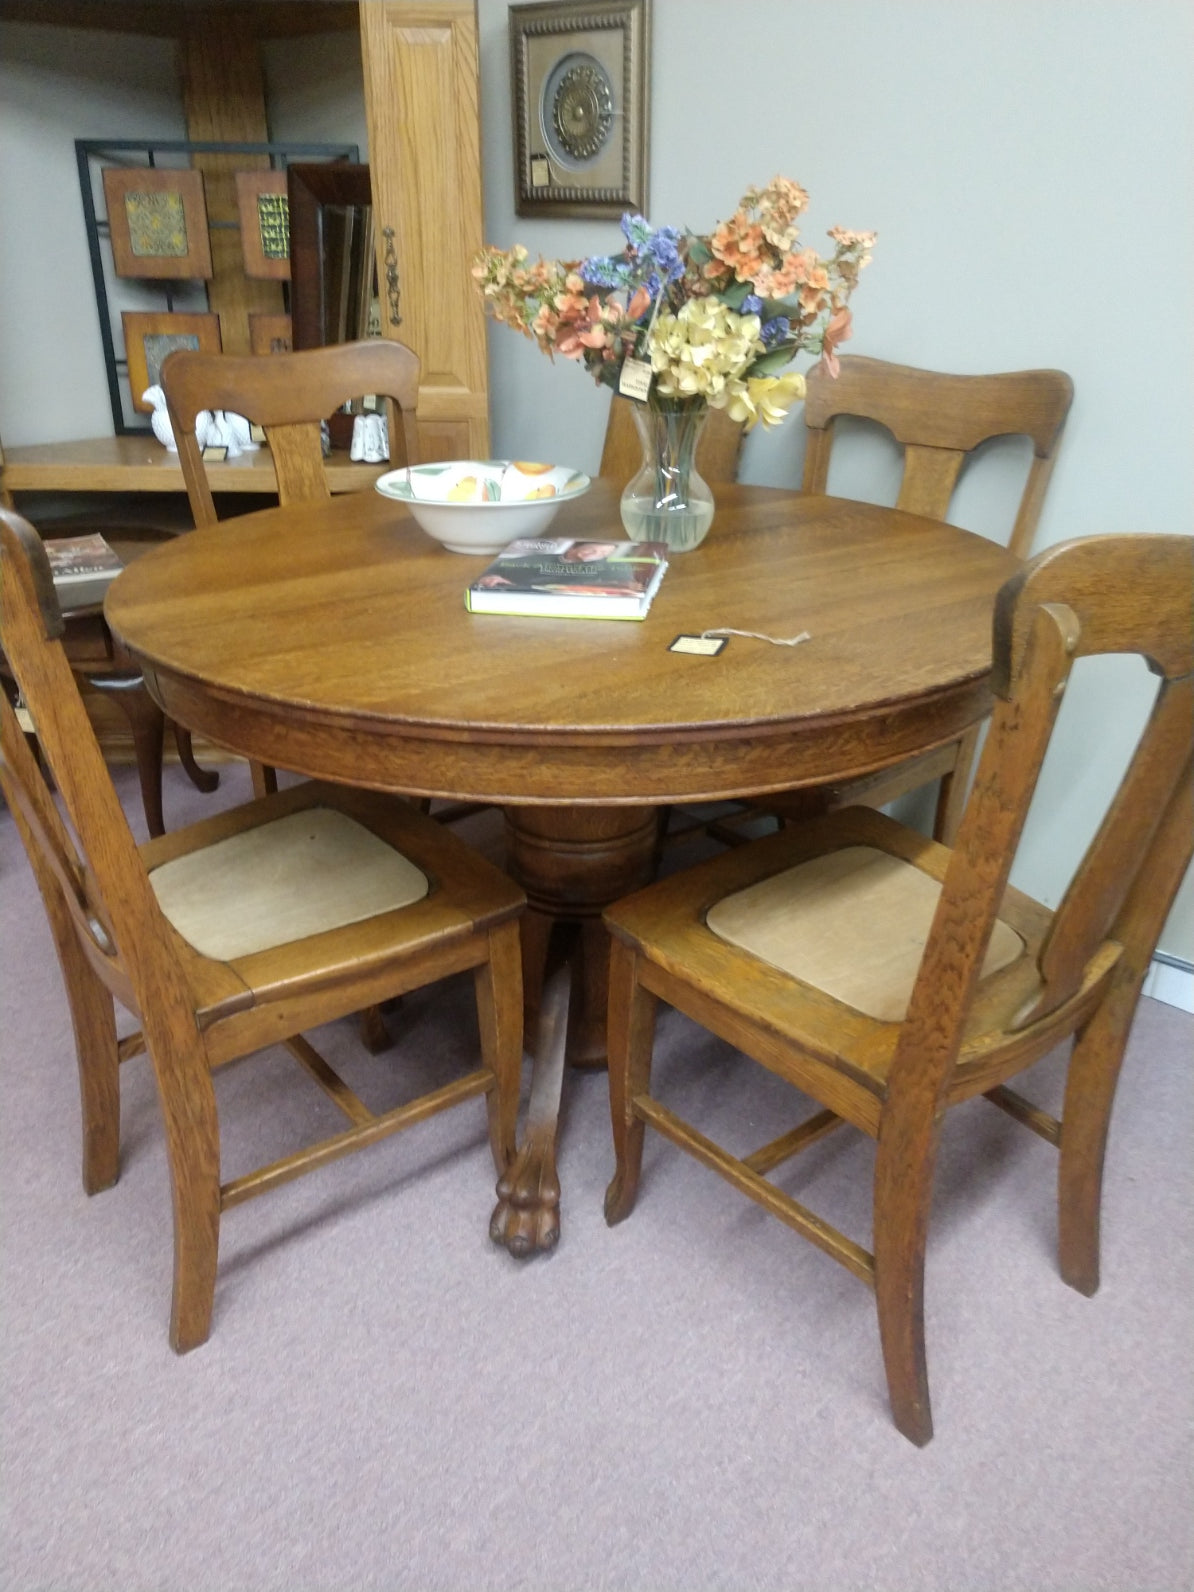 Tiger Oak Table w/ 4 Chairs and Leaf